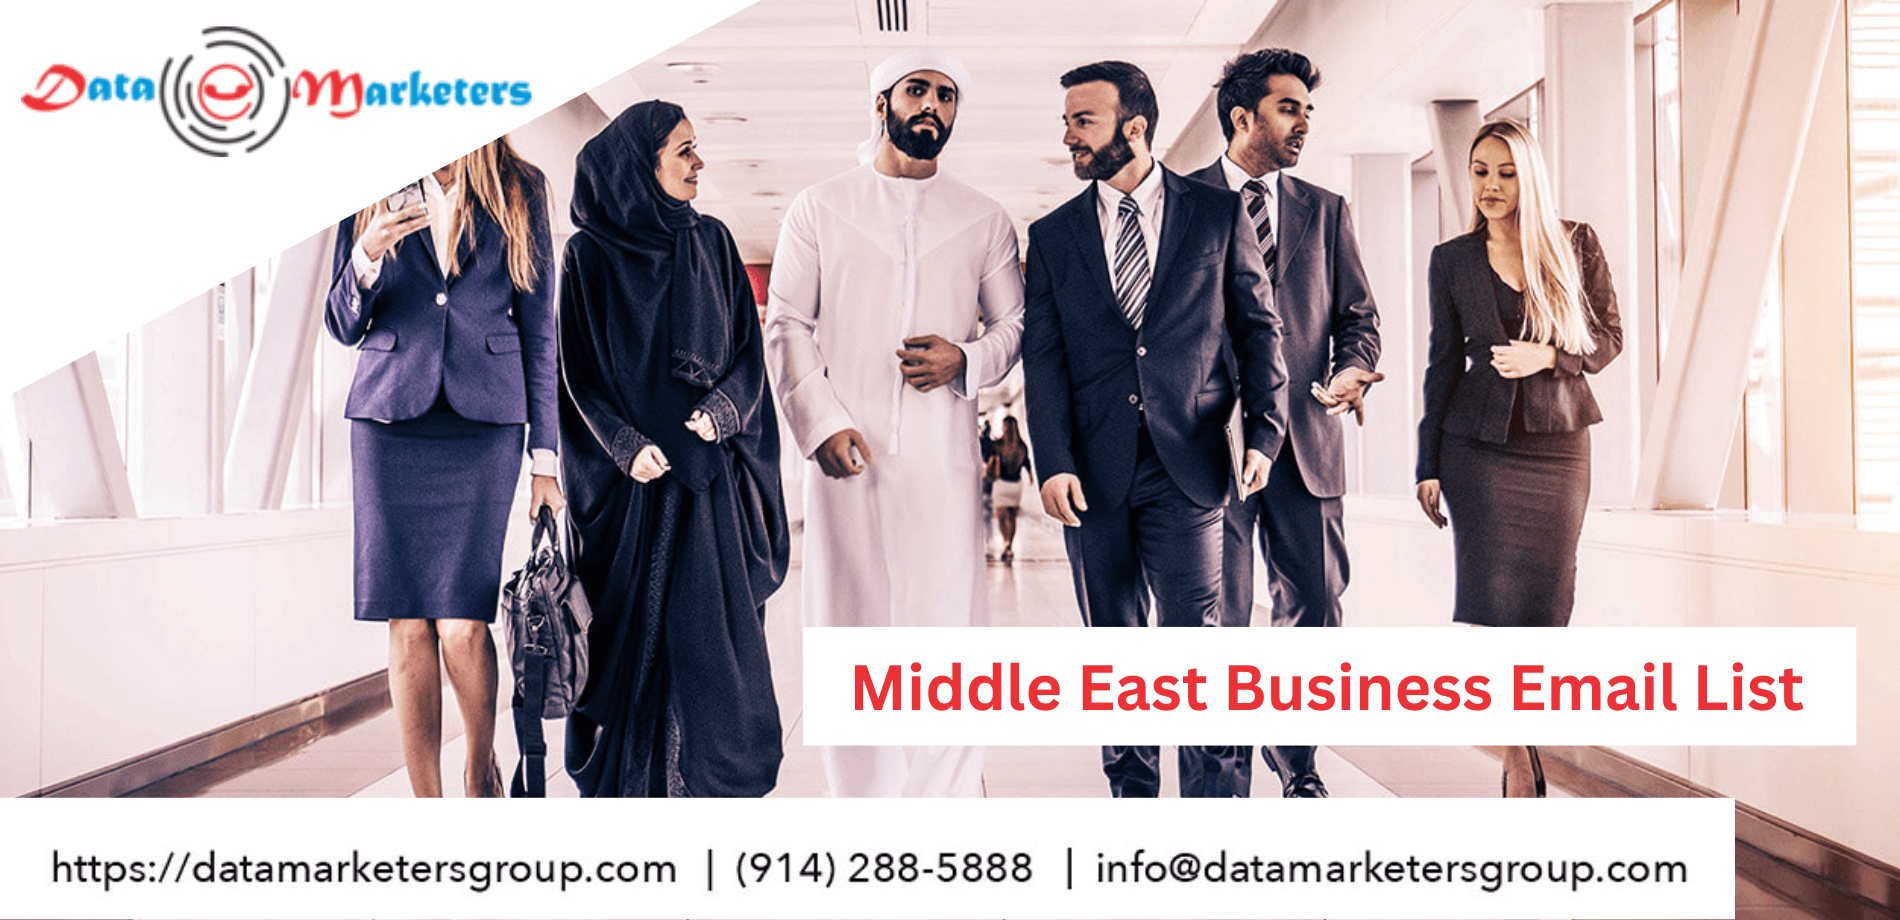 Middle East Business Mailing List | Middle East Business Email List